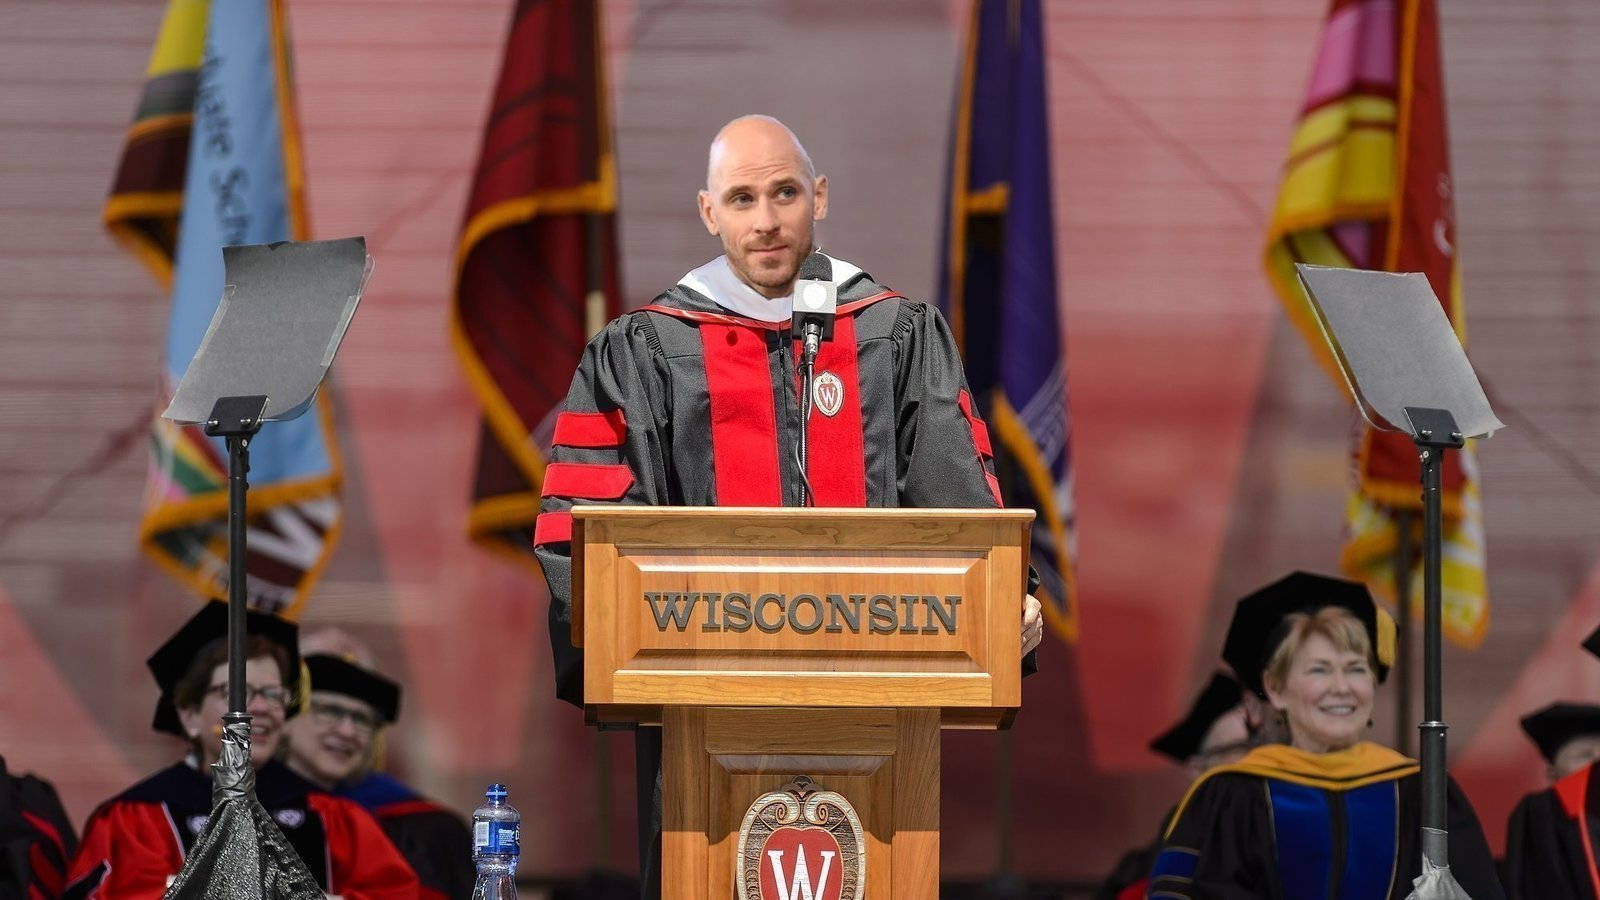 Youtube Star Johnny Sins Delivering Commencement Speech Background